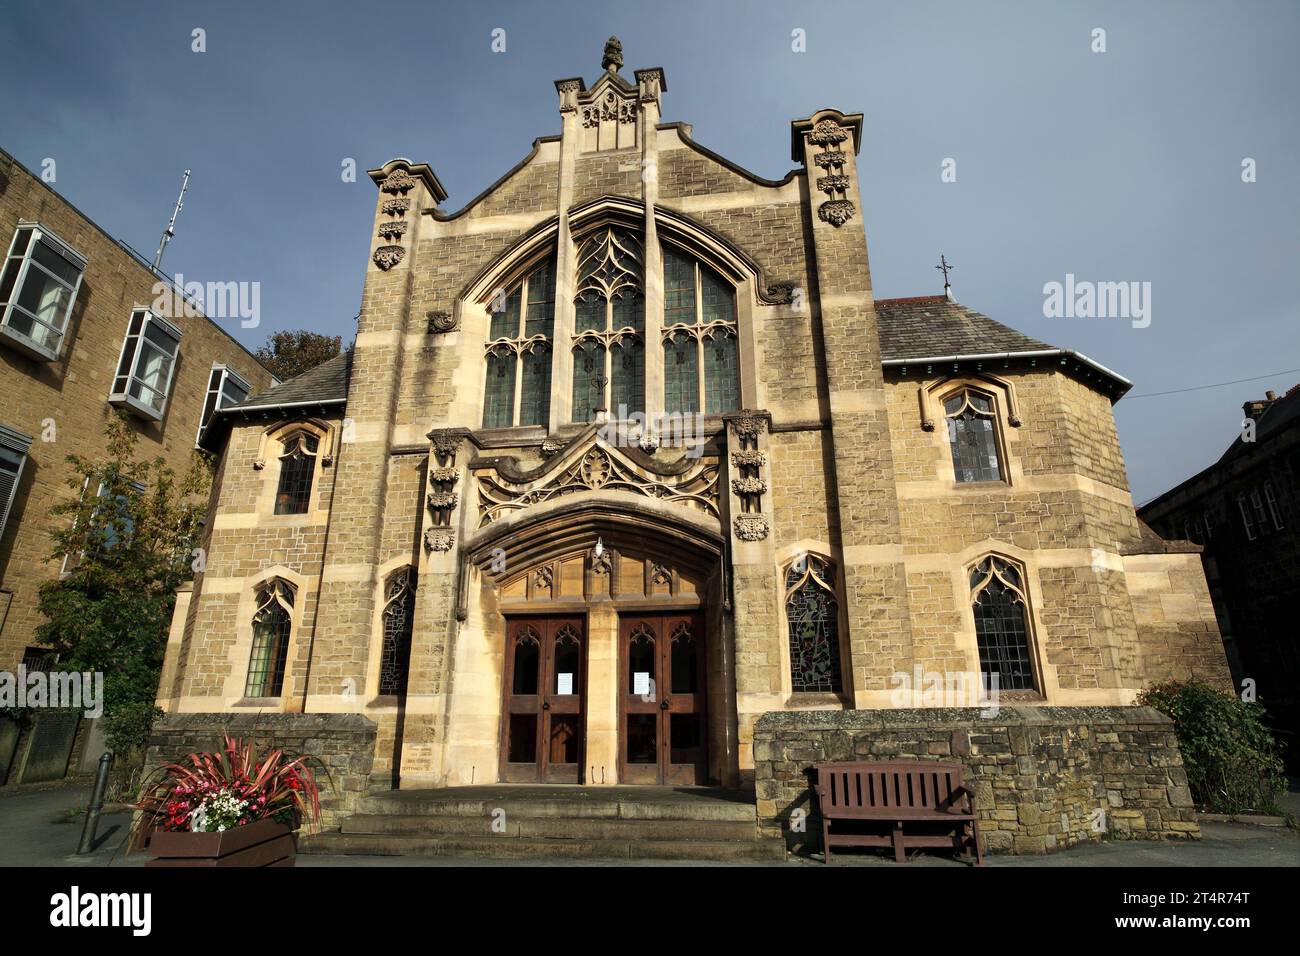 St Andrew's Methodist and United Reformed Church, Newmarket Street, Skipton, Yorkshire. Foto Stock